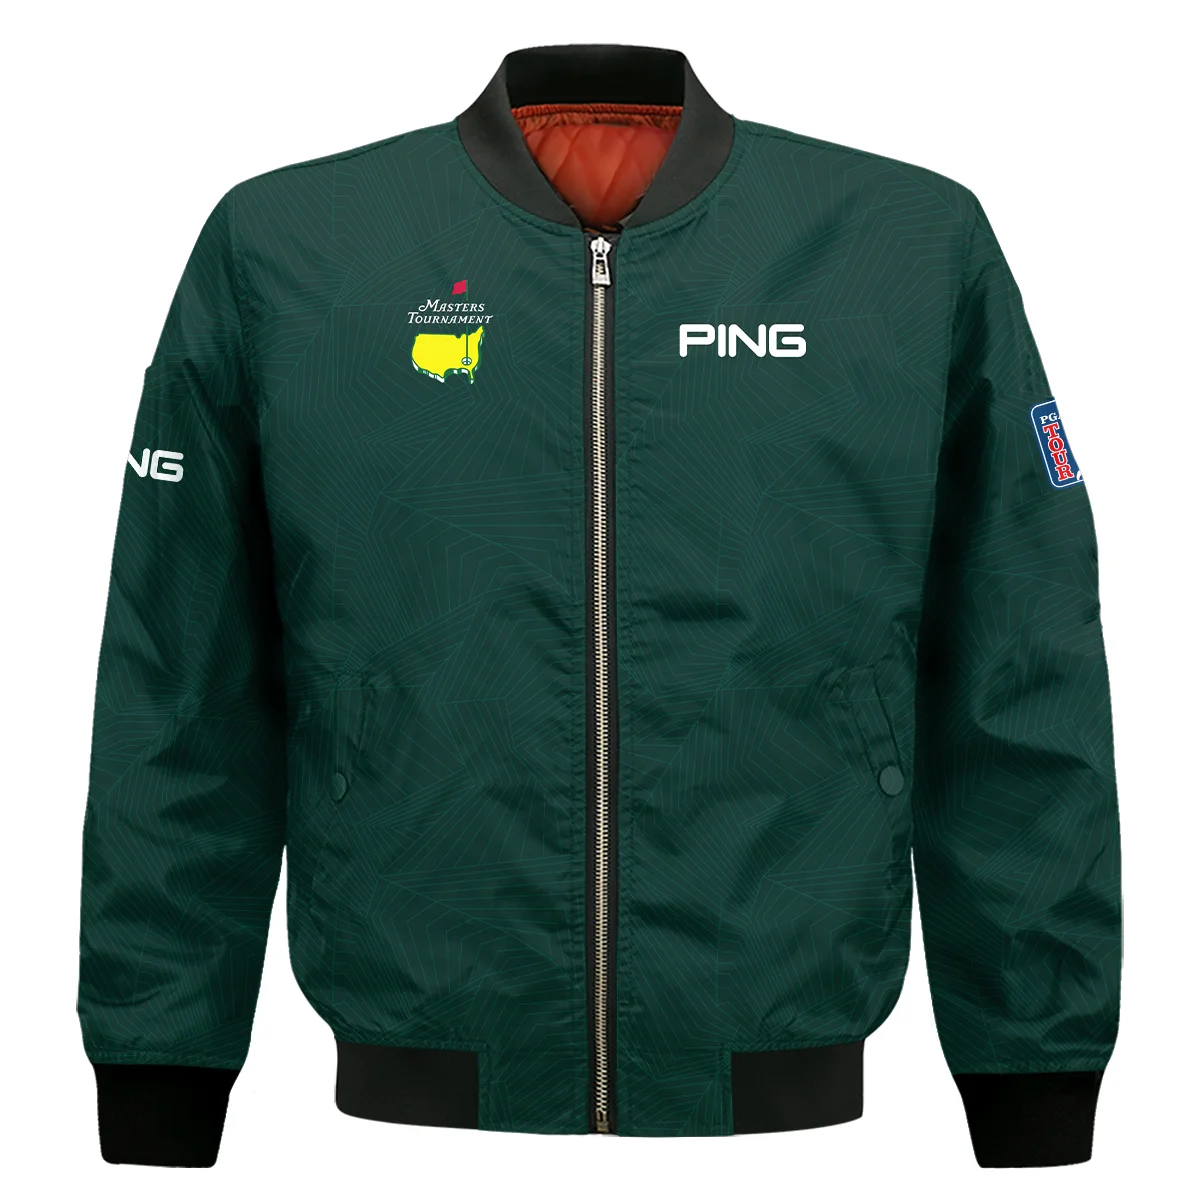 Masters Tournament Ping Pattern Sport Jersey Dark Green Bomber Jacket Style Classic Bomber Jacket